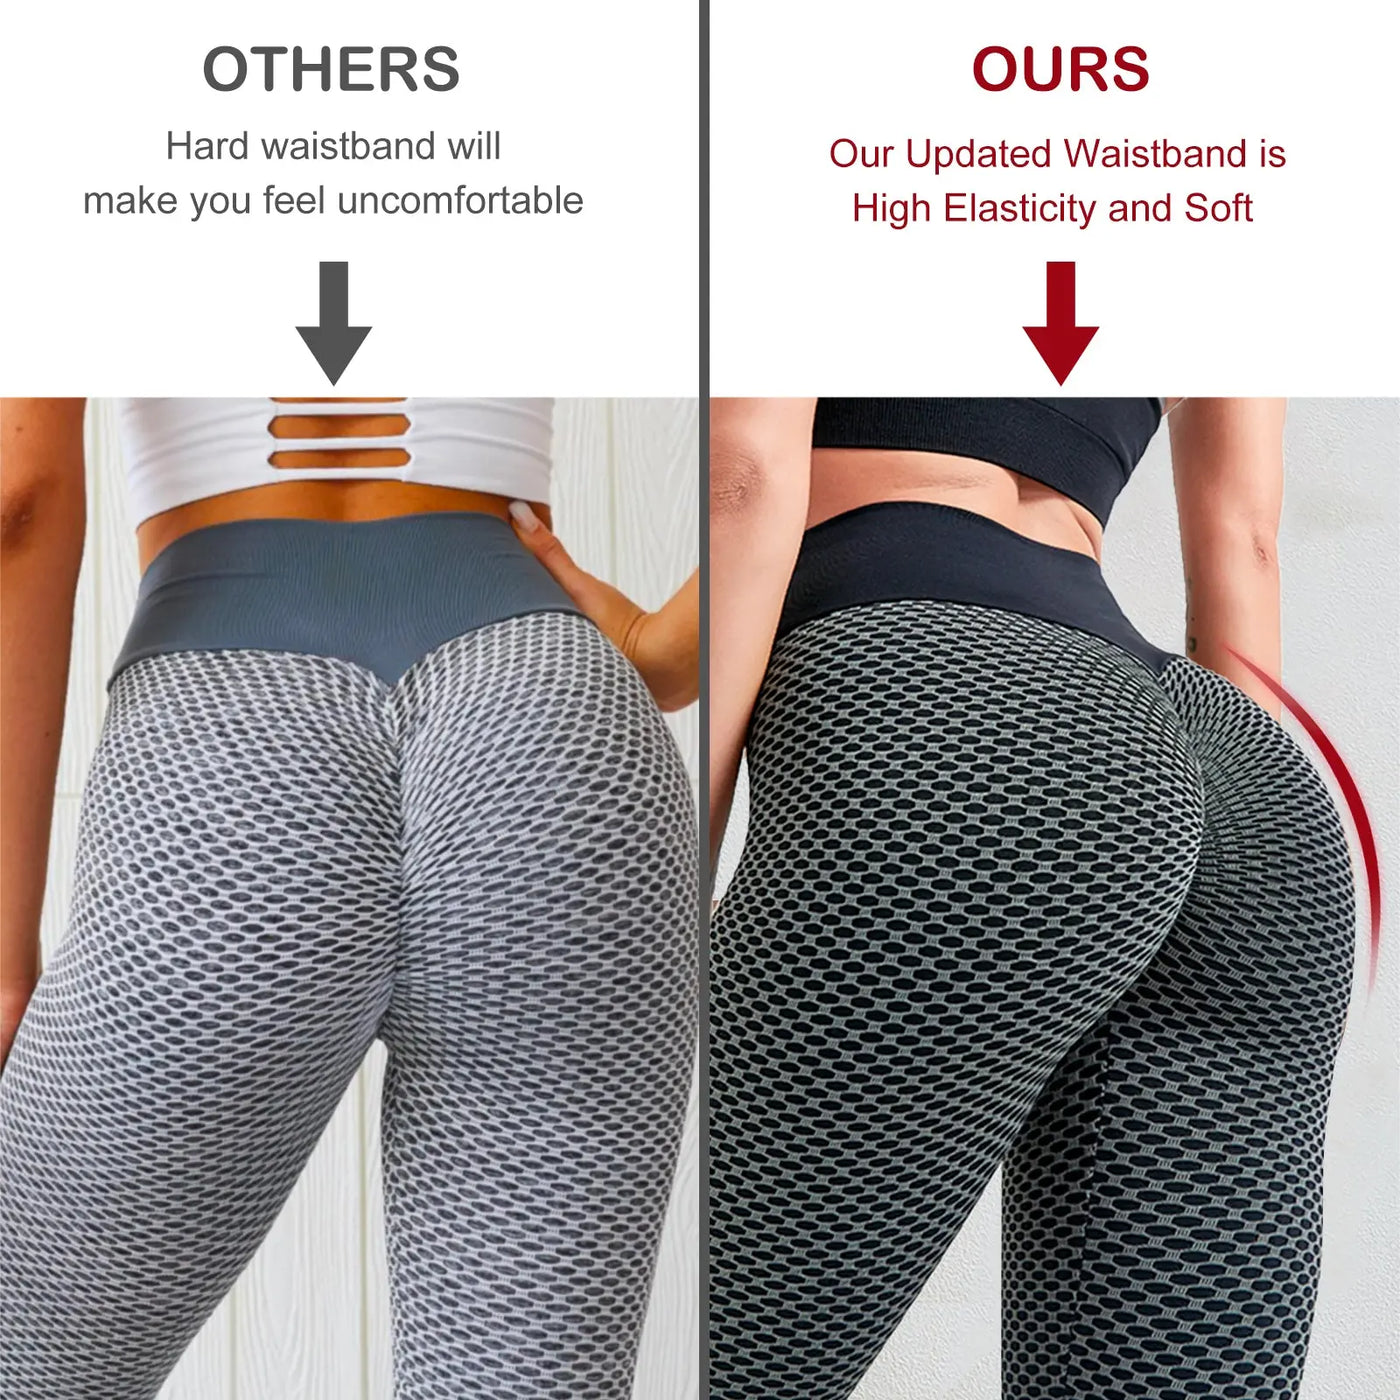 TIK Tok Leggings Women Butt Lifting Workout Tights
Overview:♥TIK Tok Legging for women crafted with compacting material(92% Polyester and 8% Elastane), makes your cellulite appear non-existent while improving your booty shape! Perfect fit and extremely flattering. Quick-dry, sweat-wicking, high stretch, comfy and soft.♥Butt Lifting Leggings serve as an instant tummy tuck and waist cruncher. High waistband designed to prevent slippage and sagging-helping to lift your butt and put it into place, giving it tha